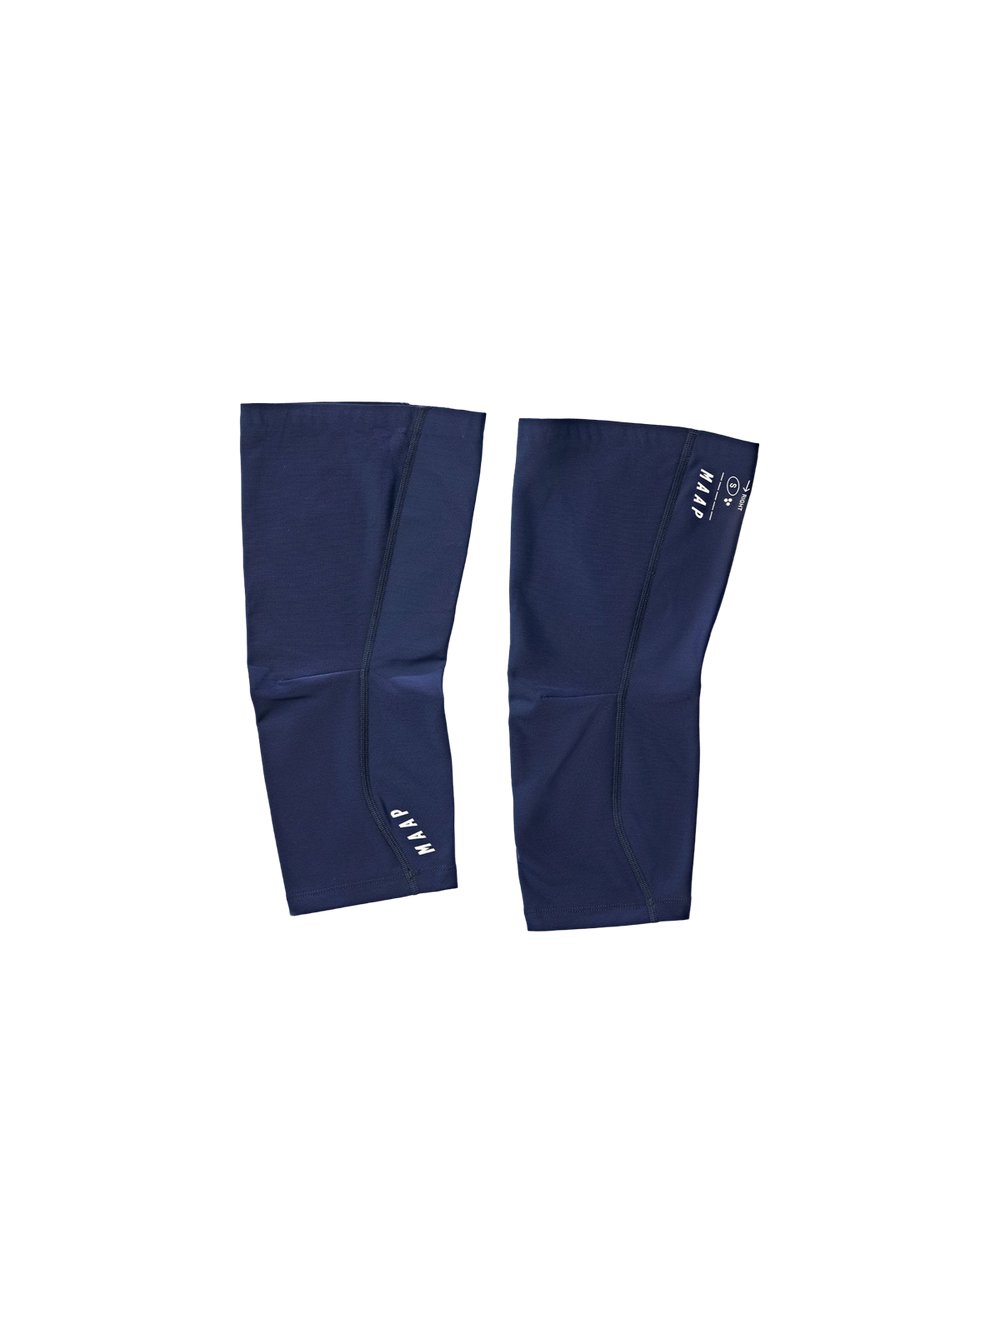 Product Image for Knee Warmers